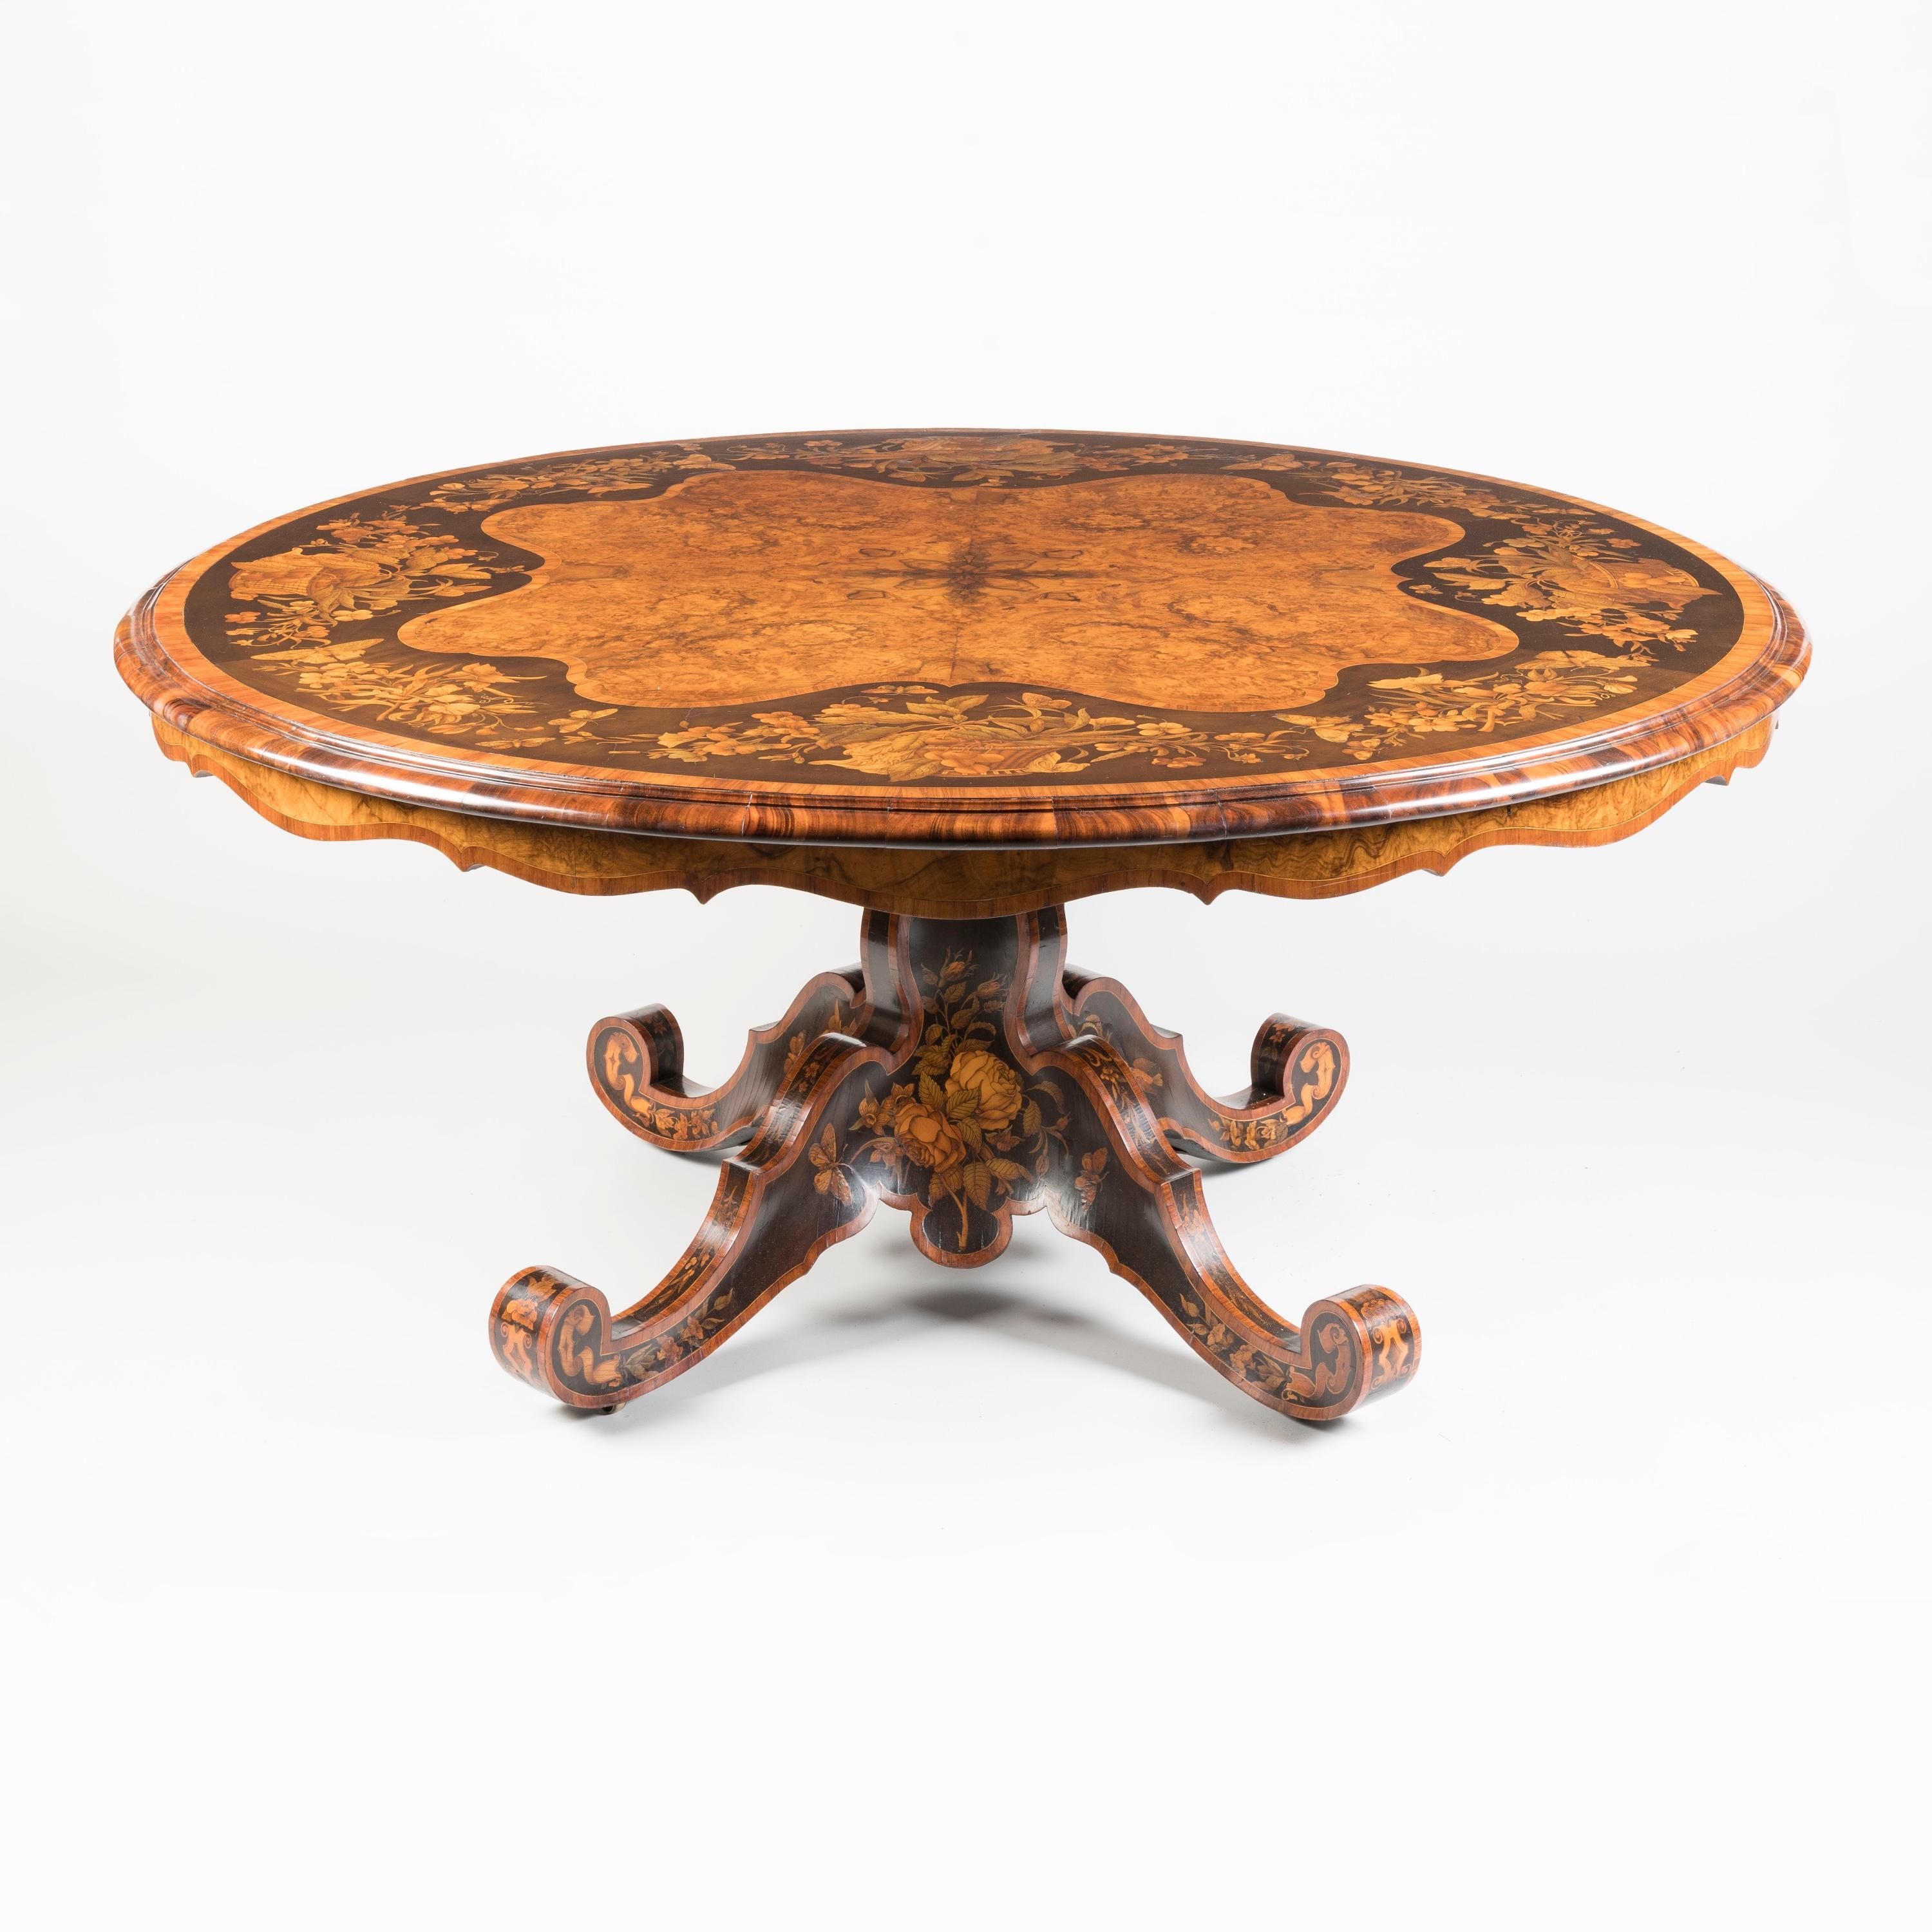 English Exquisite 19th Century Burl Walnut and Marquetry Centre Table For Sale